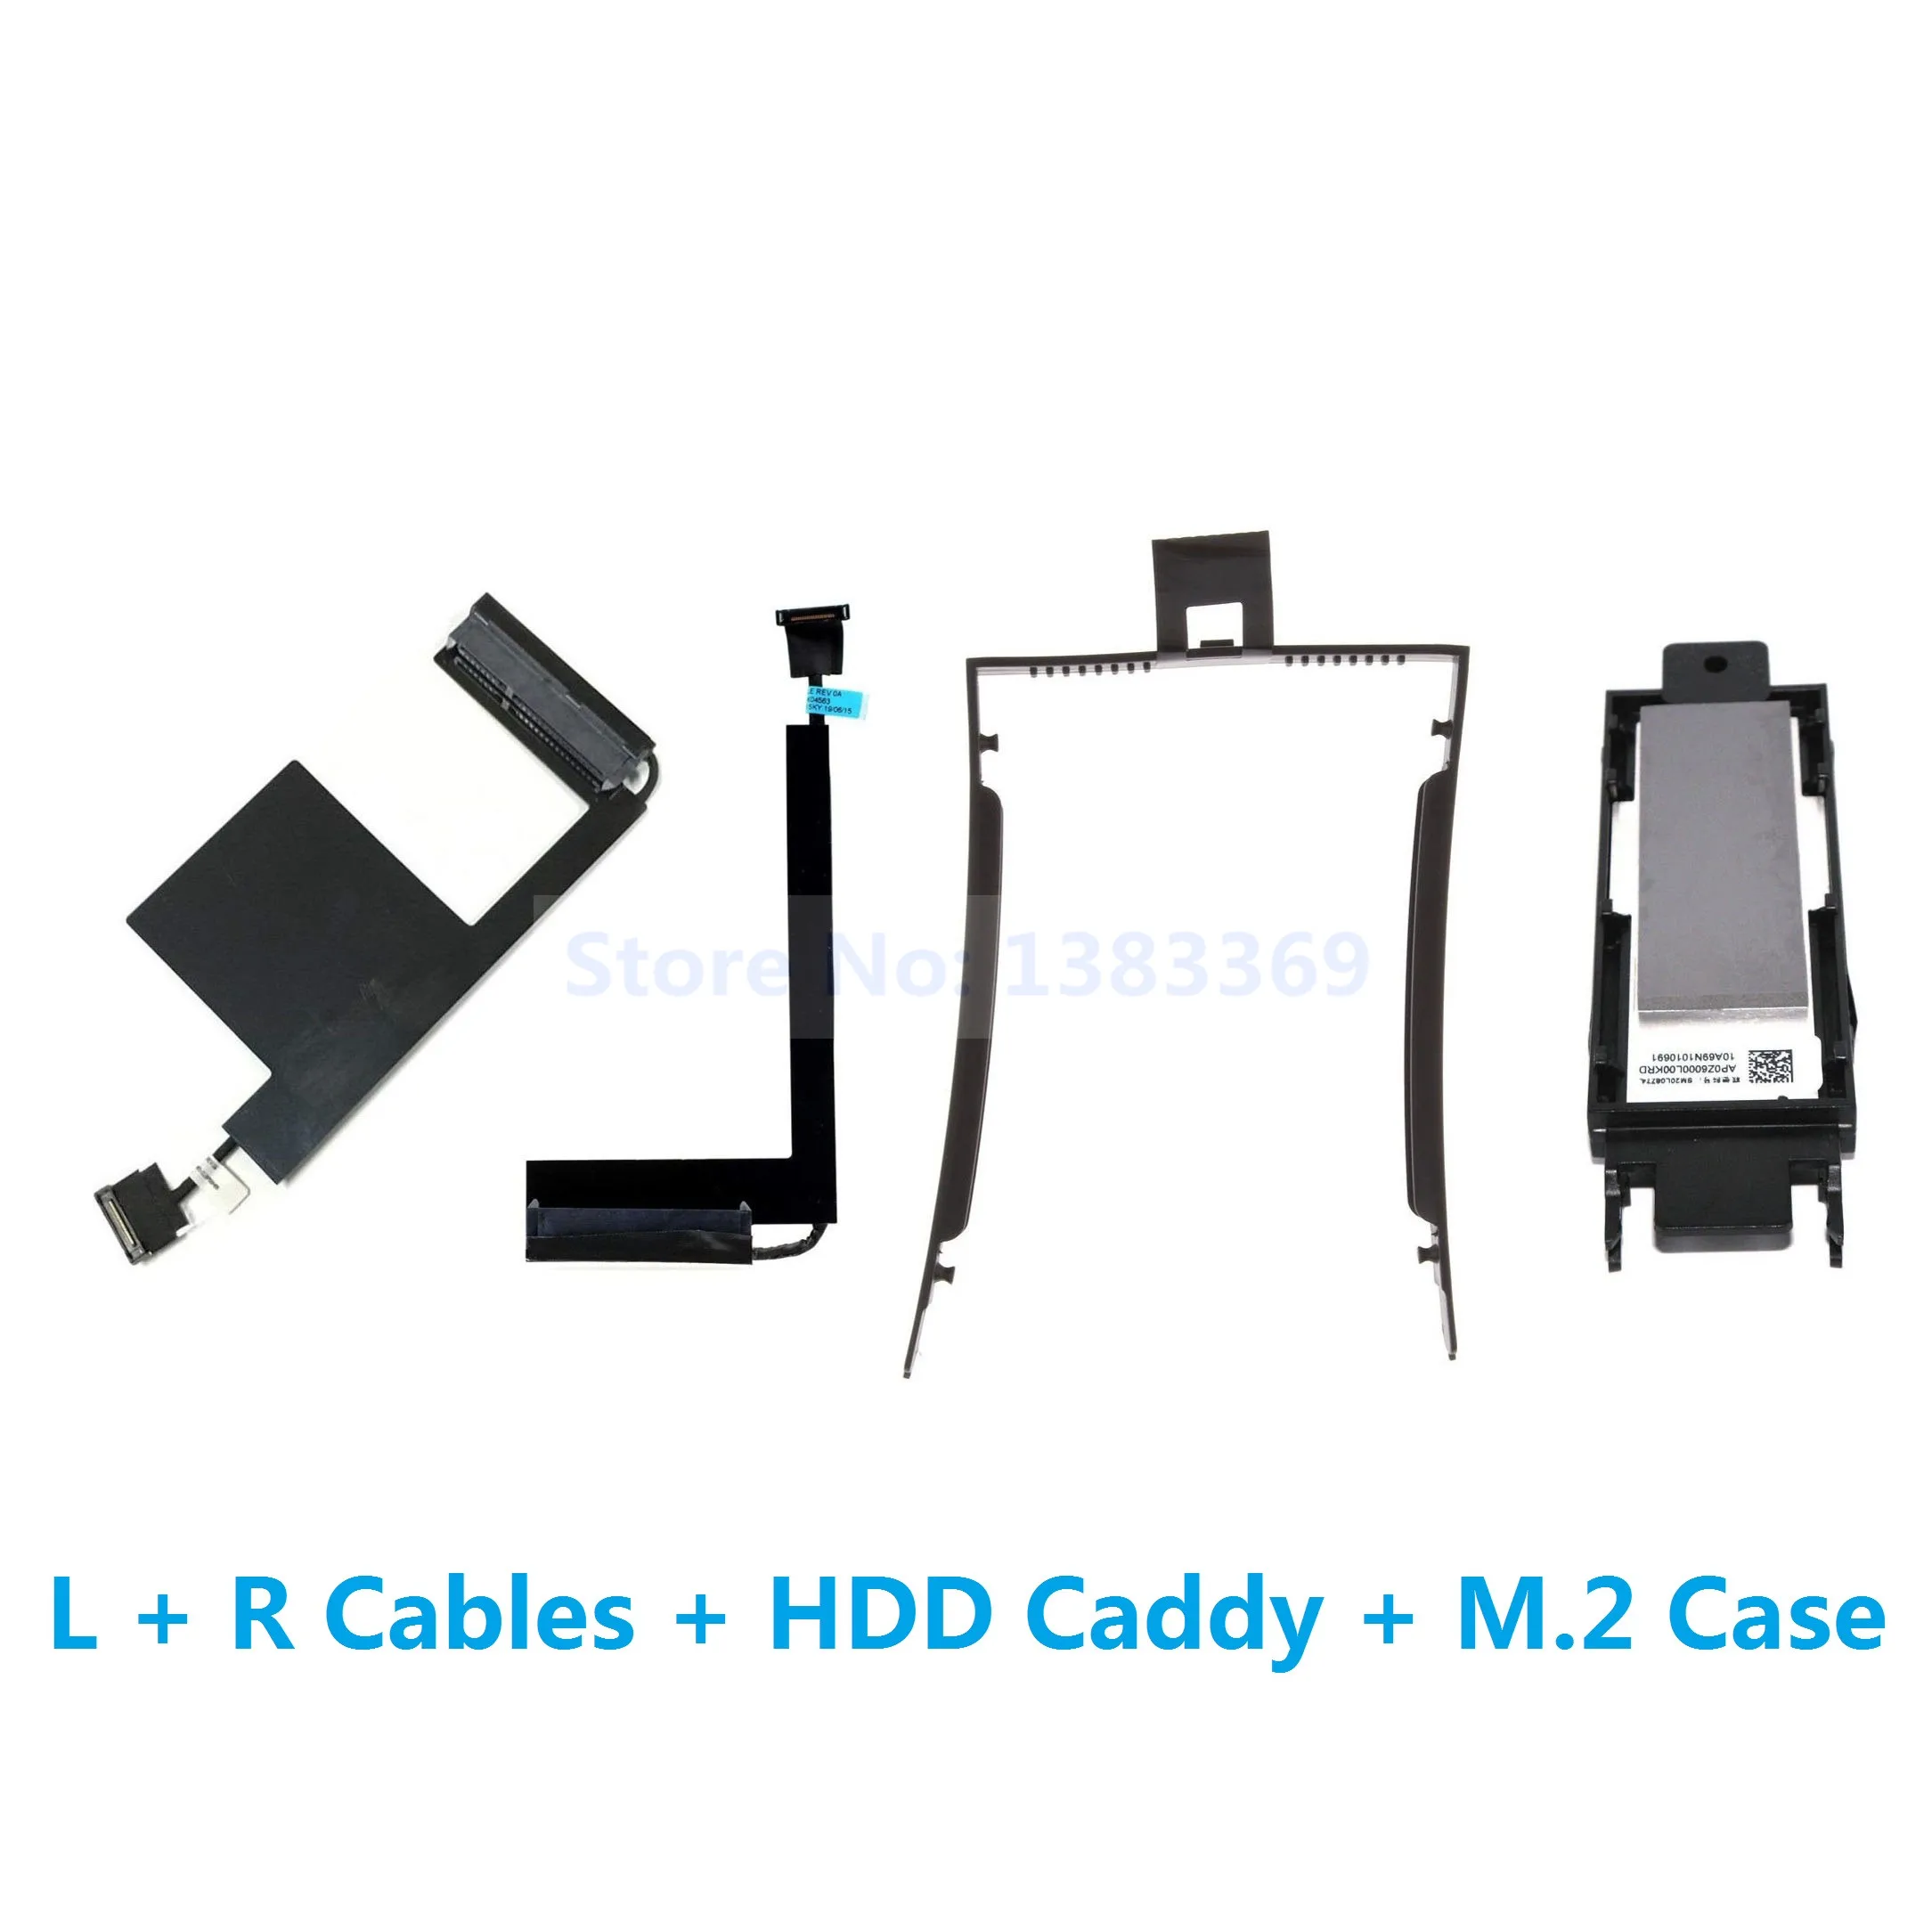 NIGUDEYANG 2nd HDD SSD Hard Drive Optical Frame Caddy Adapter for Lenovo Thinkpad L560 L570 only 